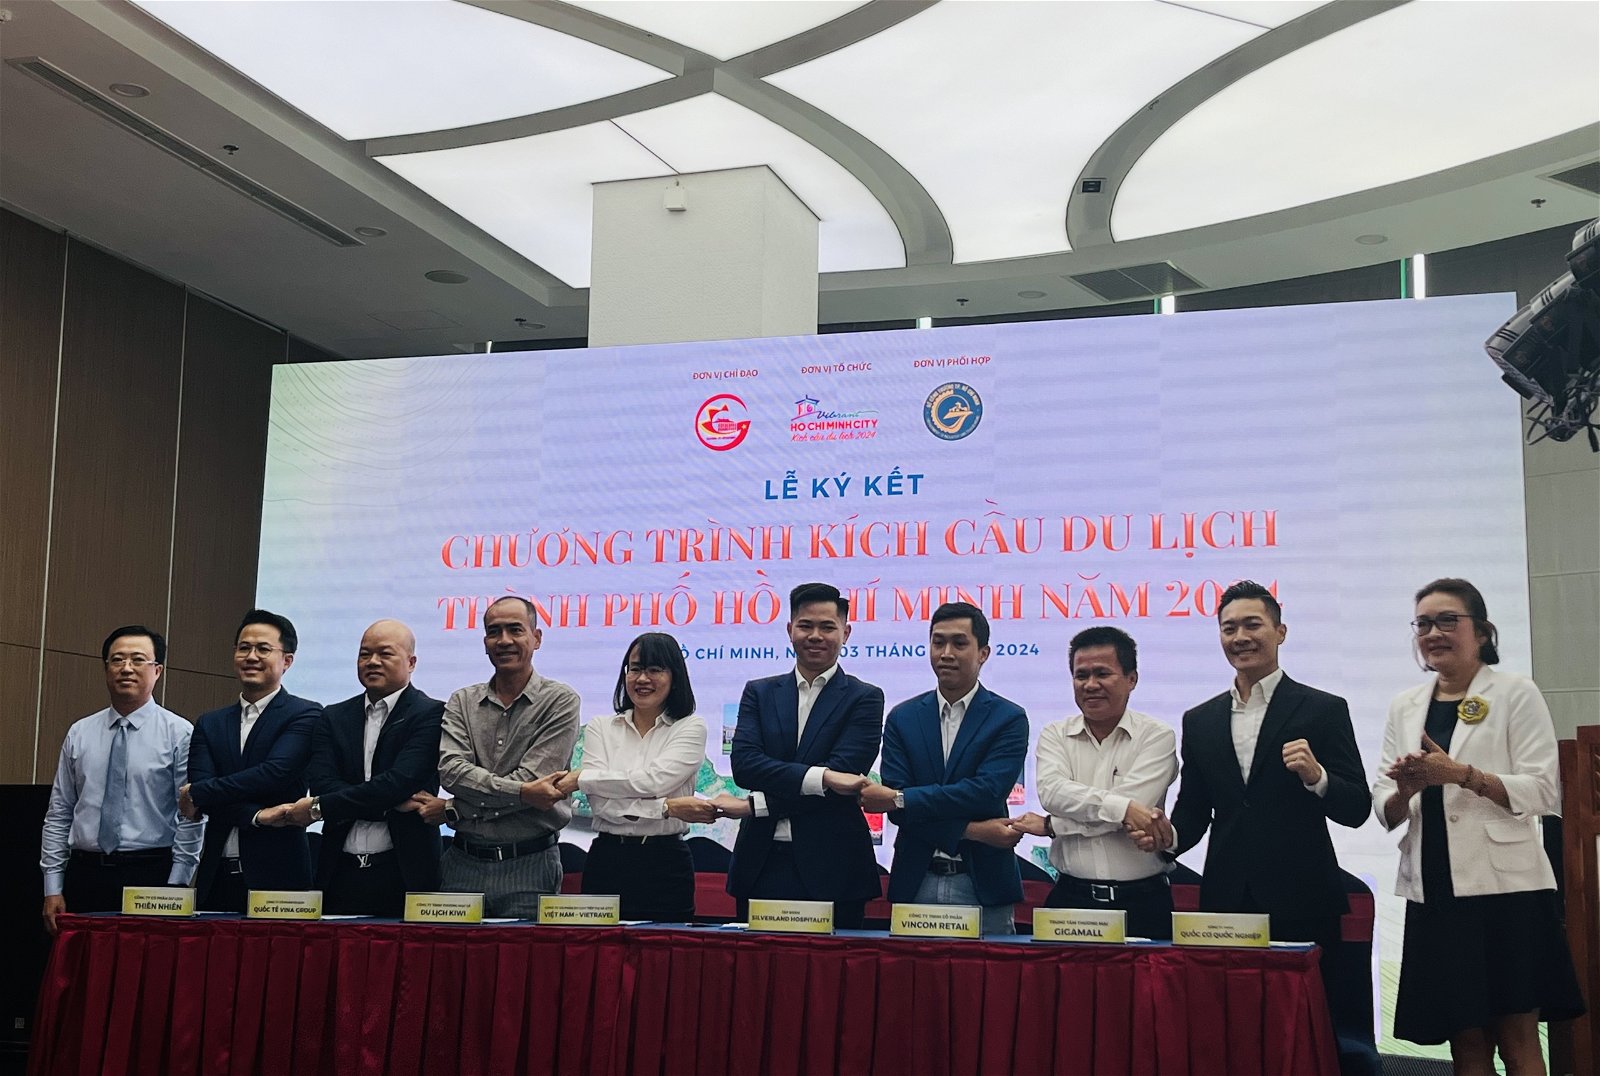 Nearly 100 businesses participate in Ho Chi Minh City tourism stimulus programme